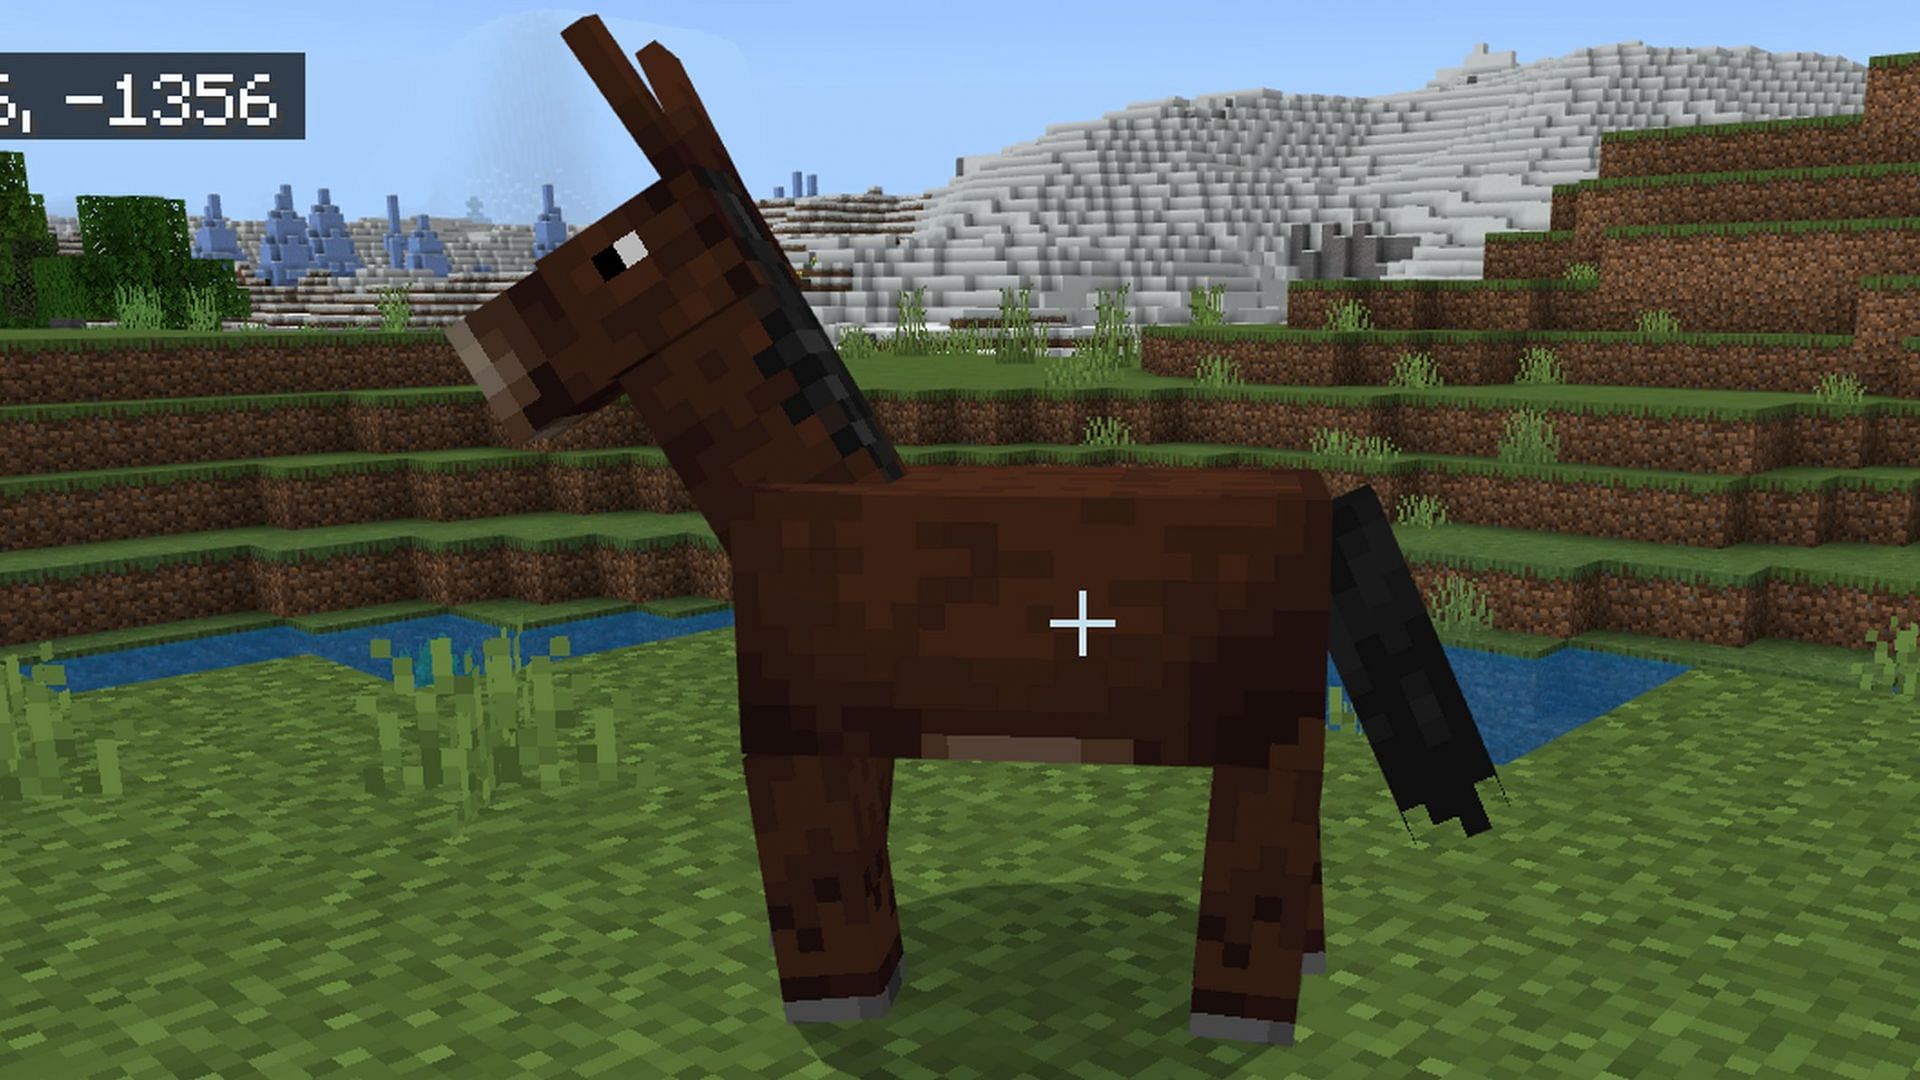 Mules can be fast, rideable mobs, and they can also carry a chest on their back in Minecraft (Image via Mojang)